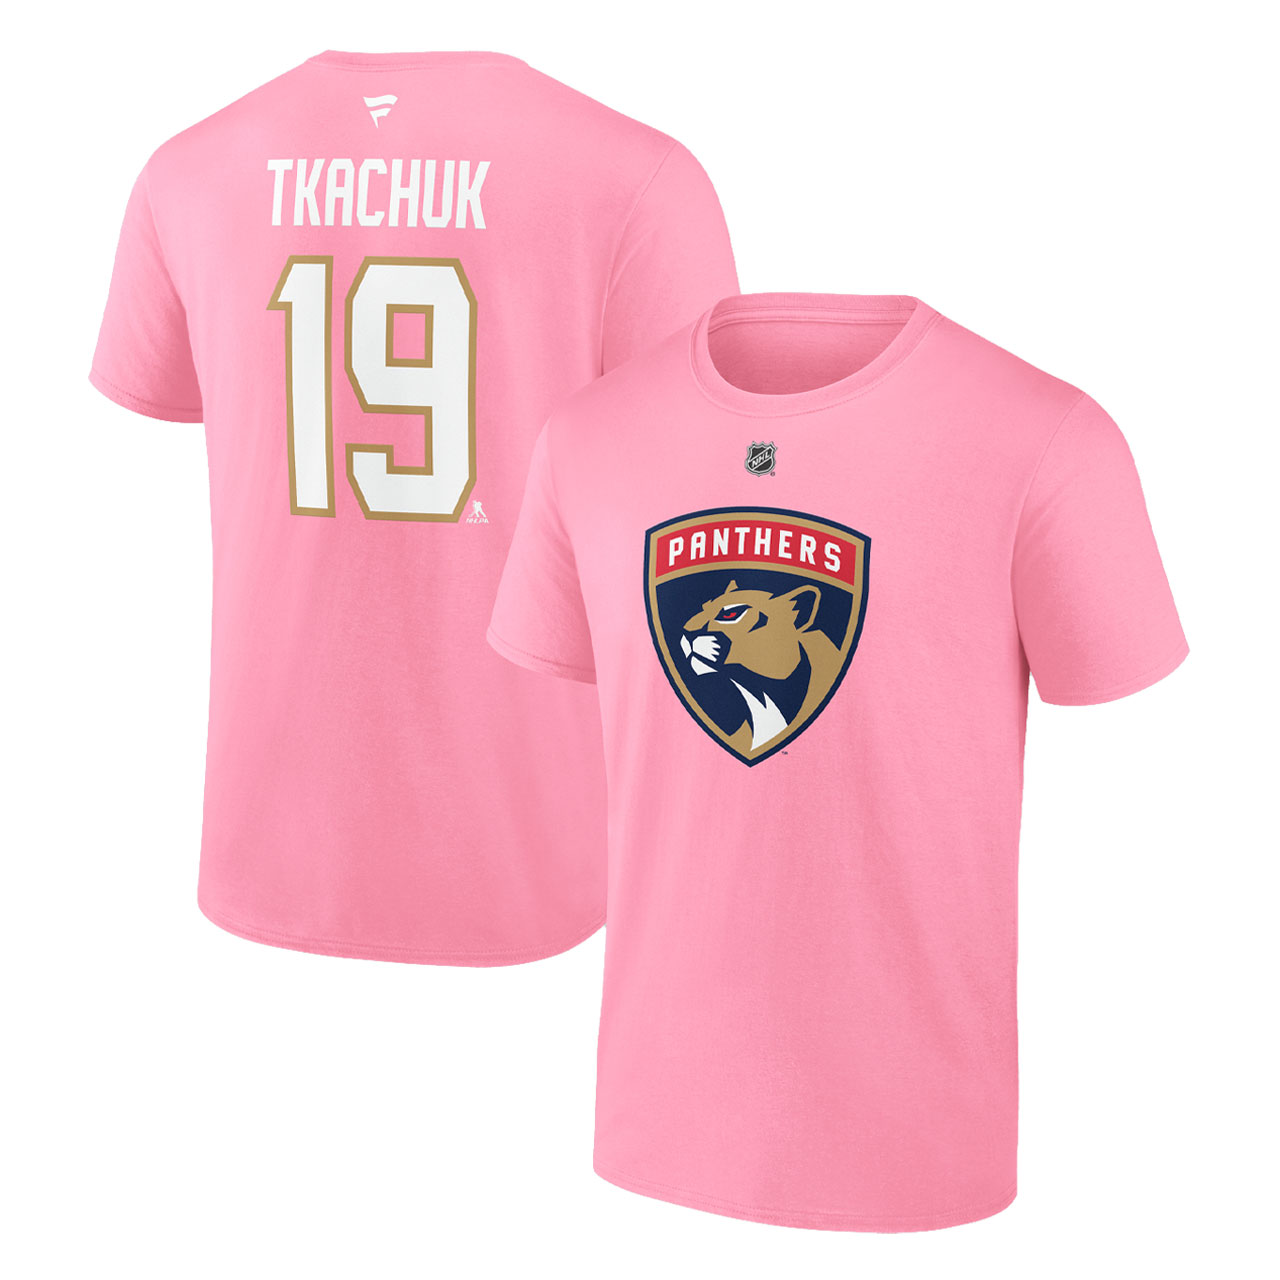 FLA Team Shop on X: Your new Cat is here ‼️ Pre-order your Matthew Tkachuk  jersey now! »   / X